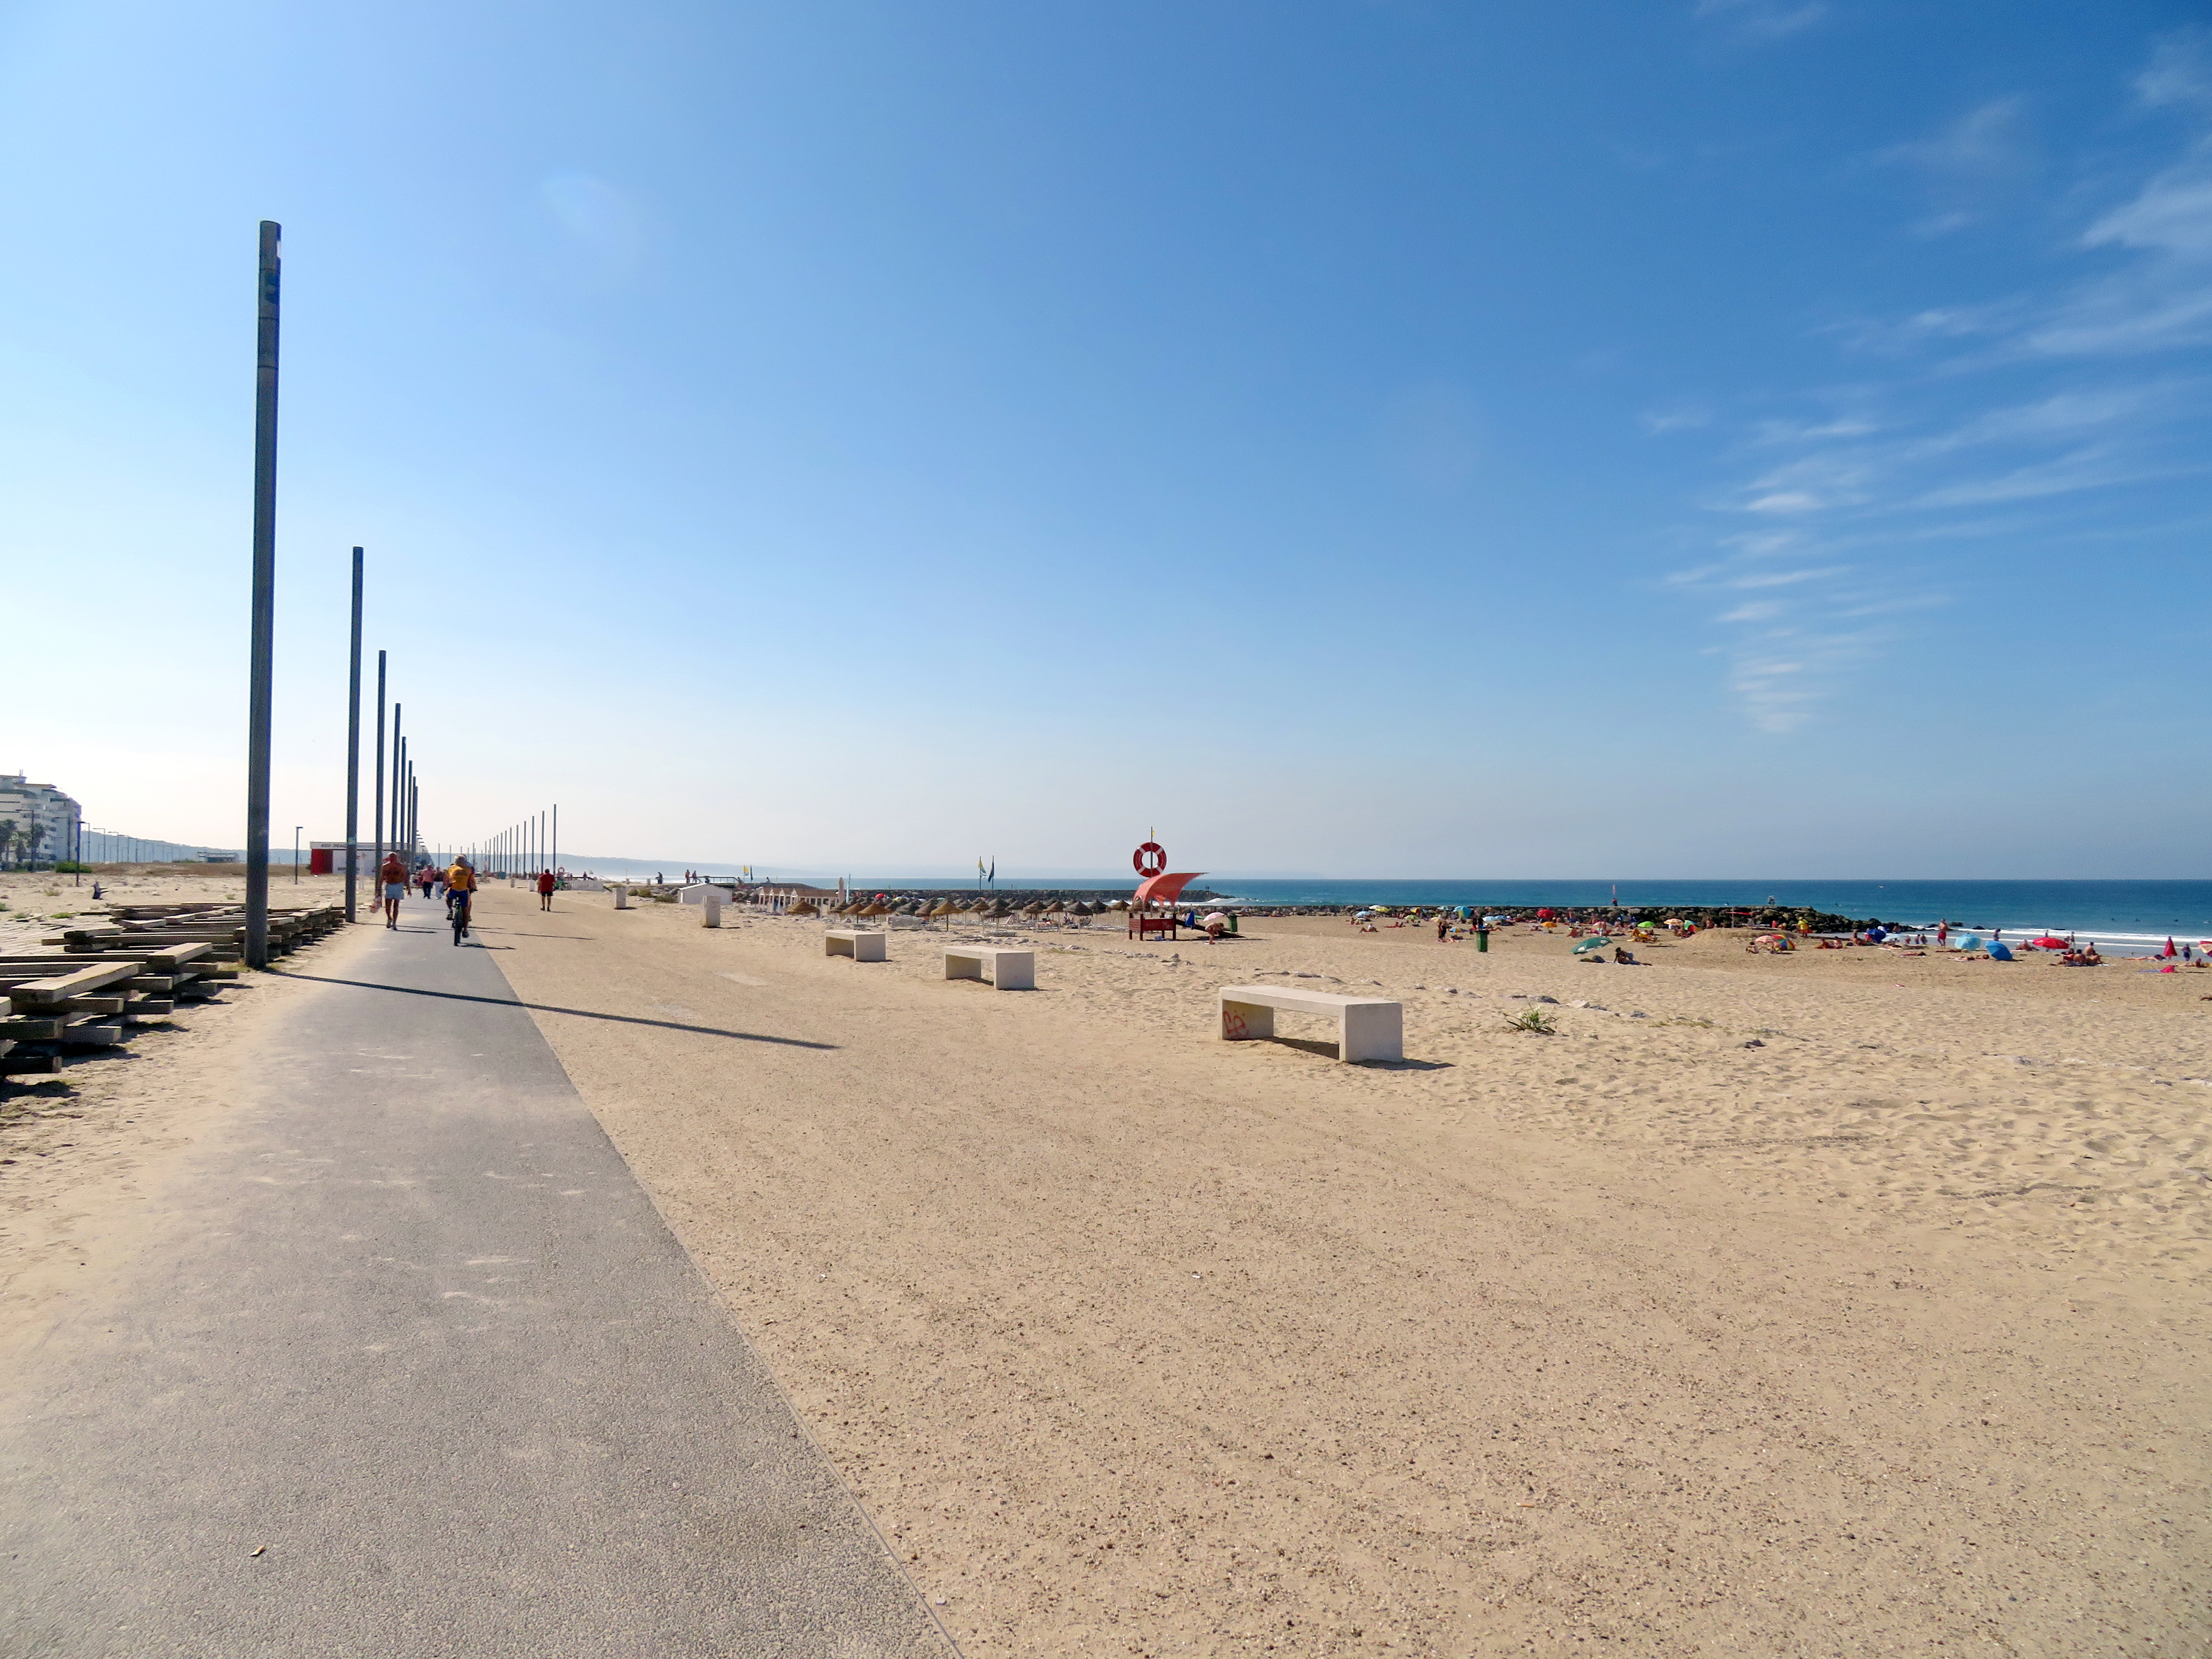 There are many cycling paths along the beaches – perfect for easy riding with lots of breaks.